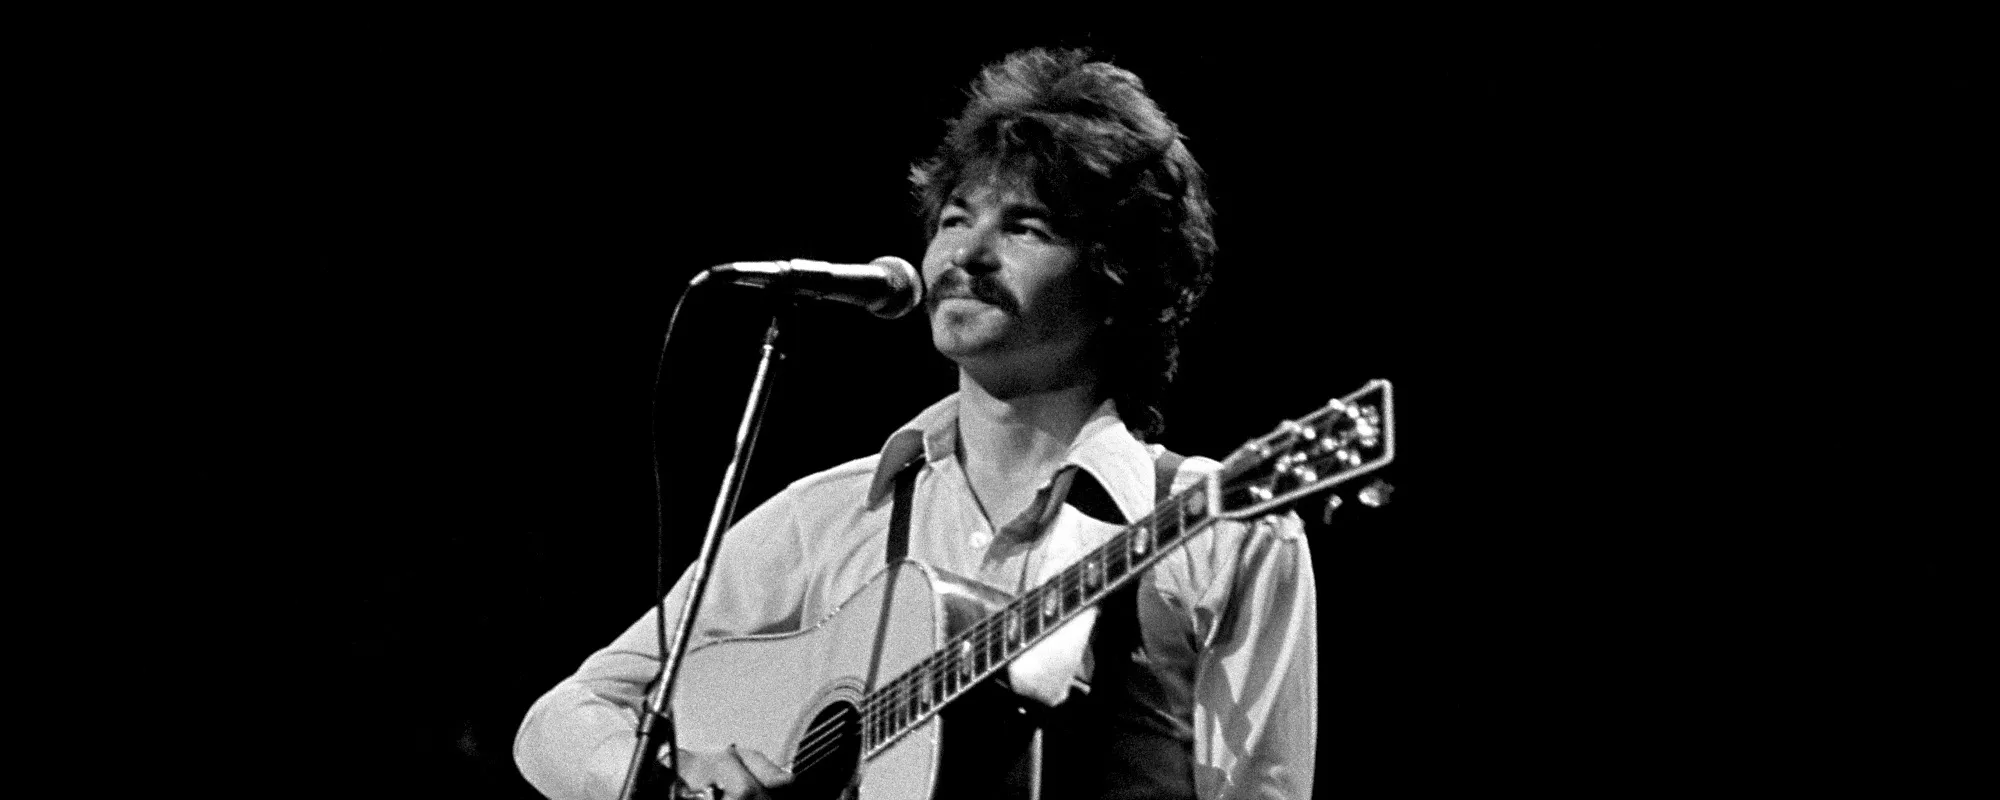 6 Little Known Facts About John Prine